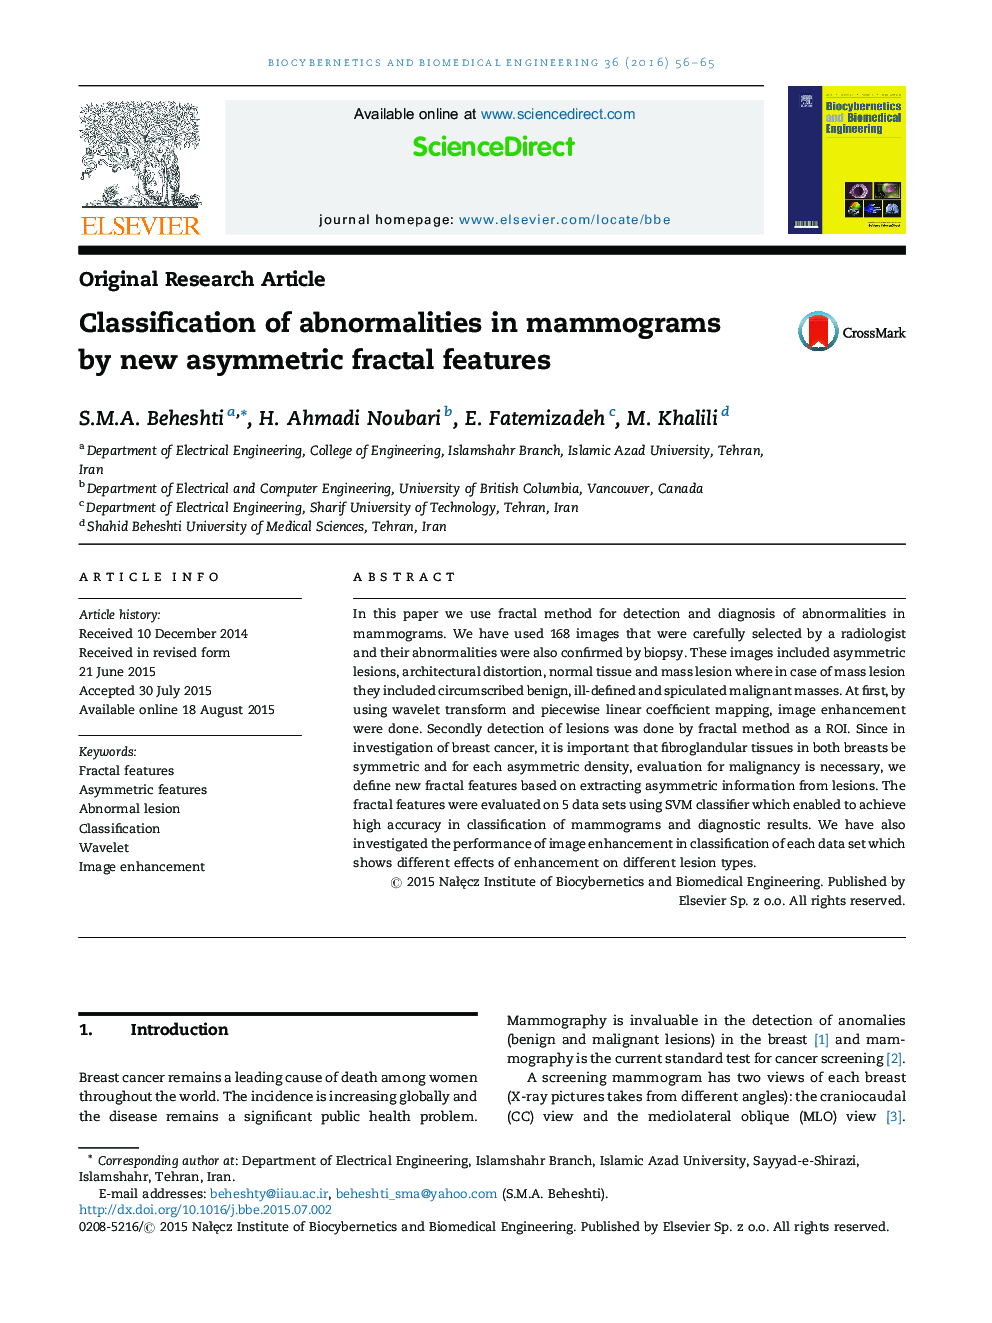 Classification of abnormalities in mammograms by new asymmetric fractal features